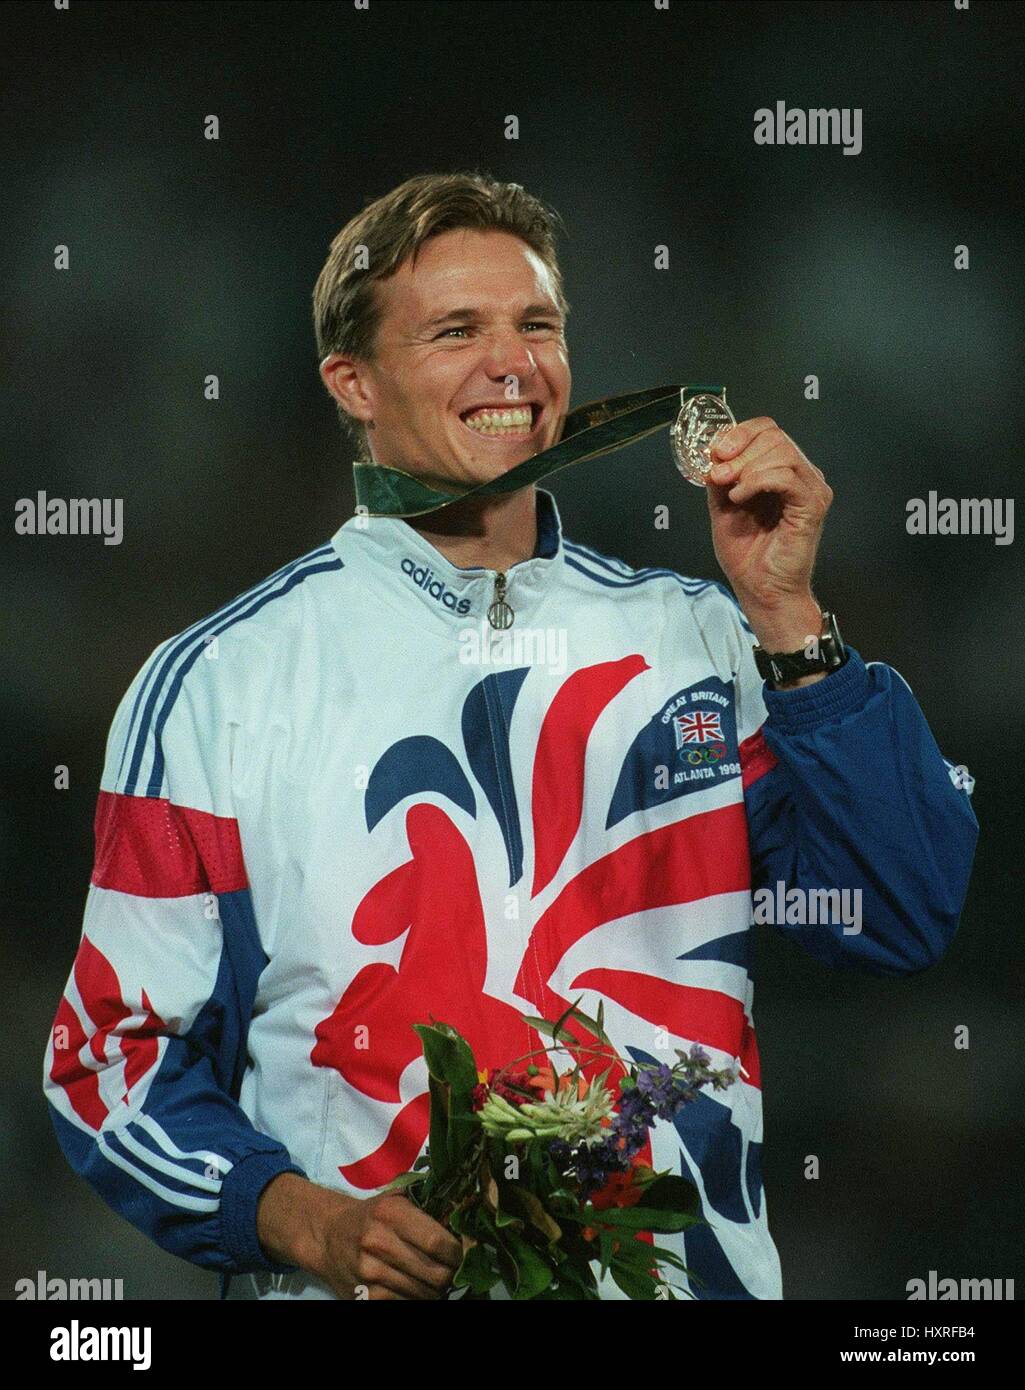 ROGER BLACK WITH SILVER MEDAL ATLANTA 96' 01 August 1996 Stock Photo